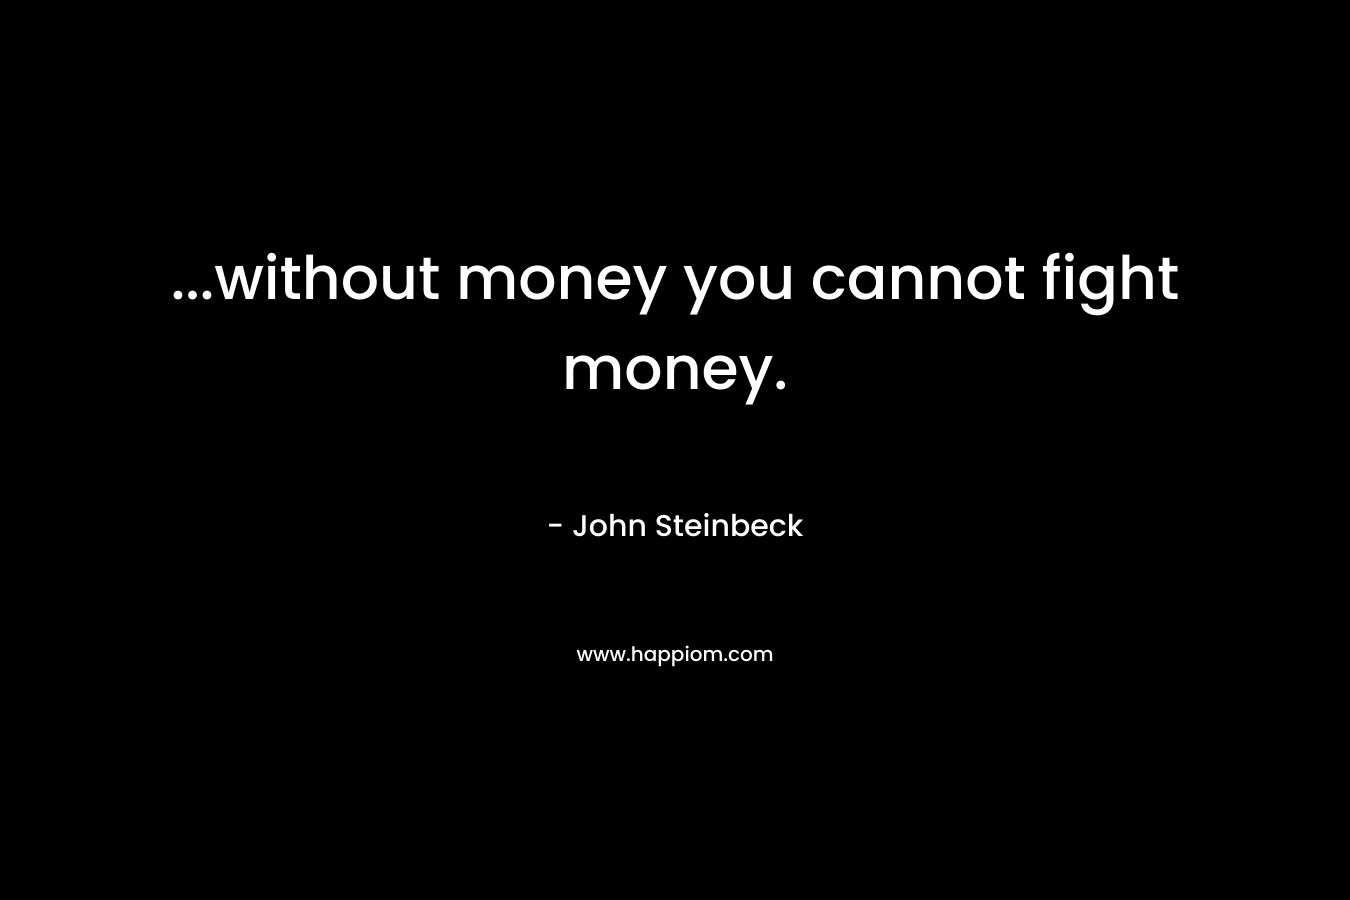 ...without money you cannot fight money.